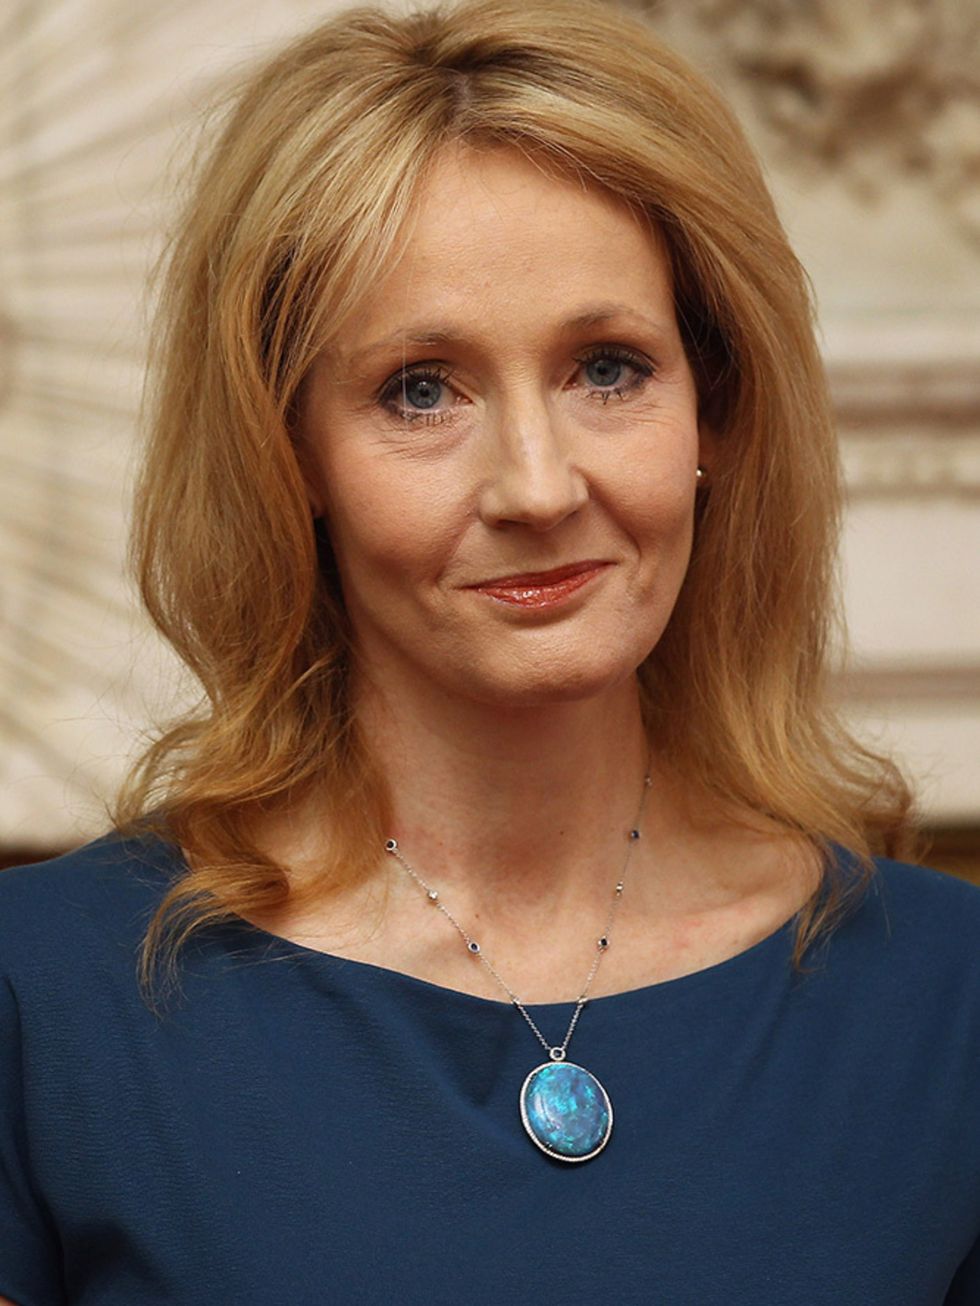 <p><strong>J.K. Rowling, Author </strong></p><p>'It is impossible to live without failing at something, unless you live so cautiously that you might has well not have lived at all, in which case you have failed by default.'</p>